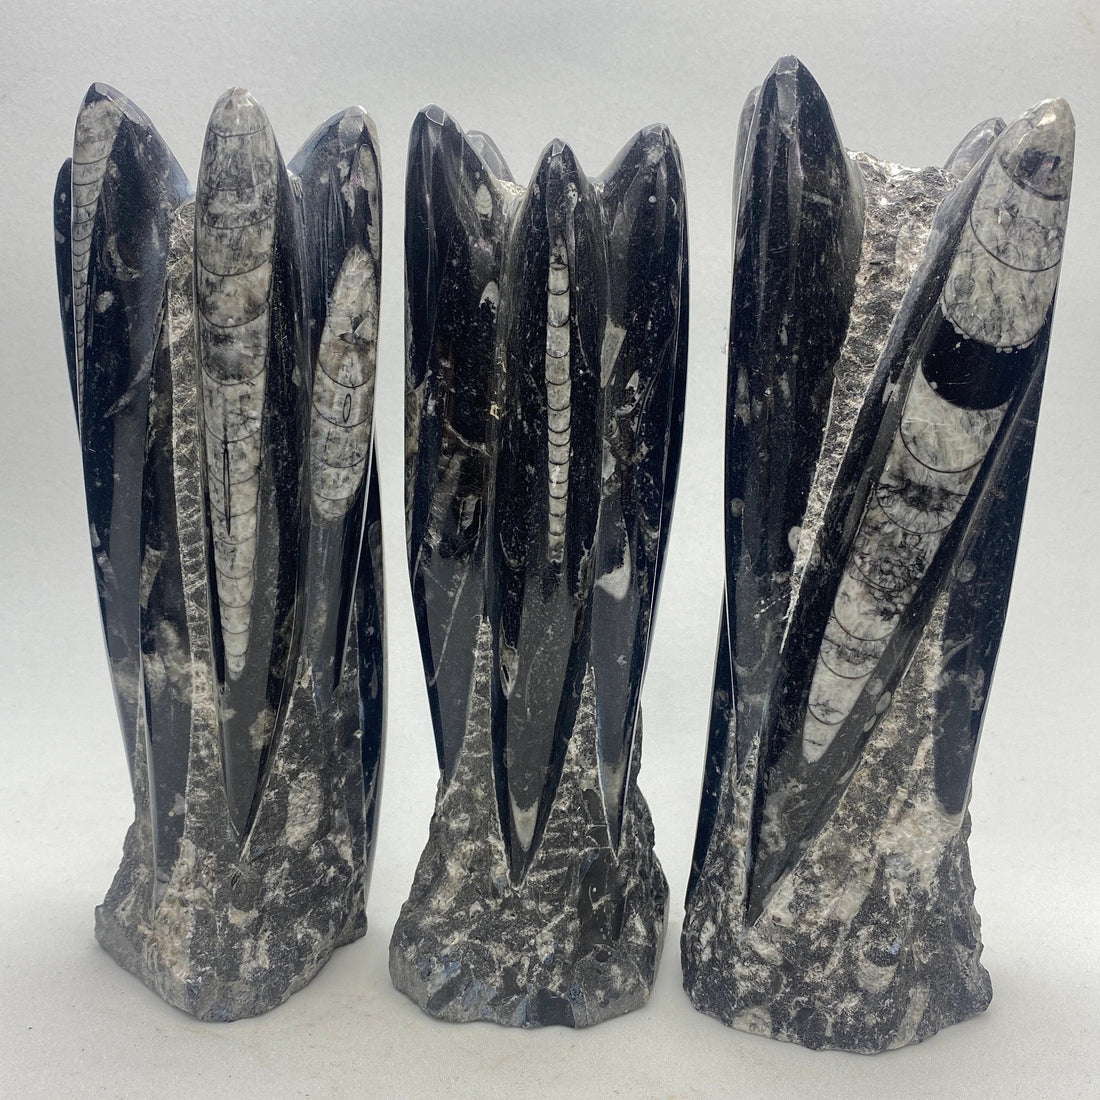 Orthoceras Fossil Towers crystals